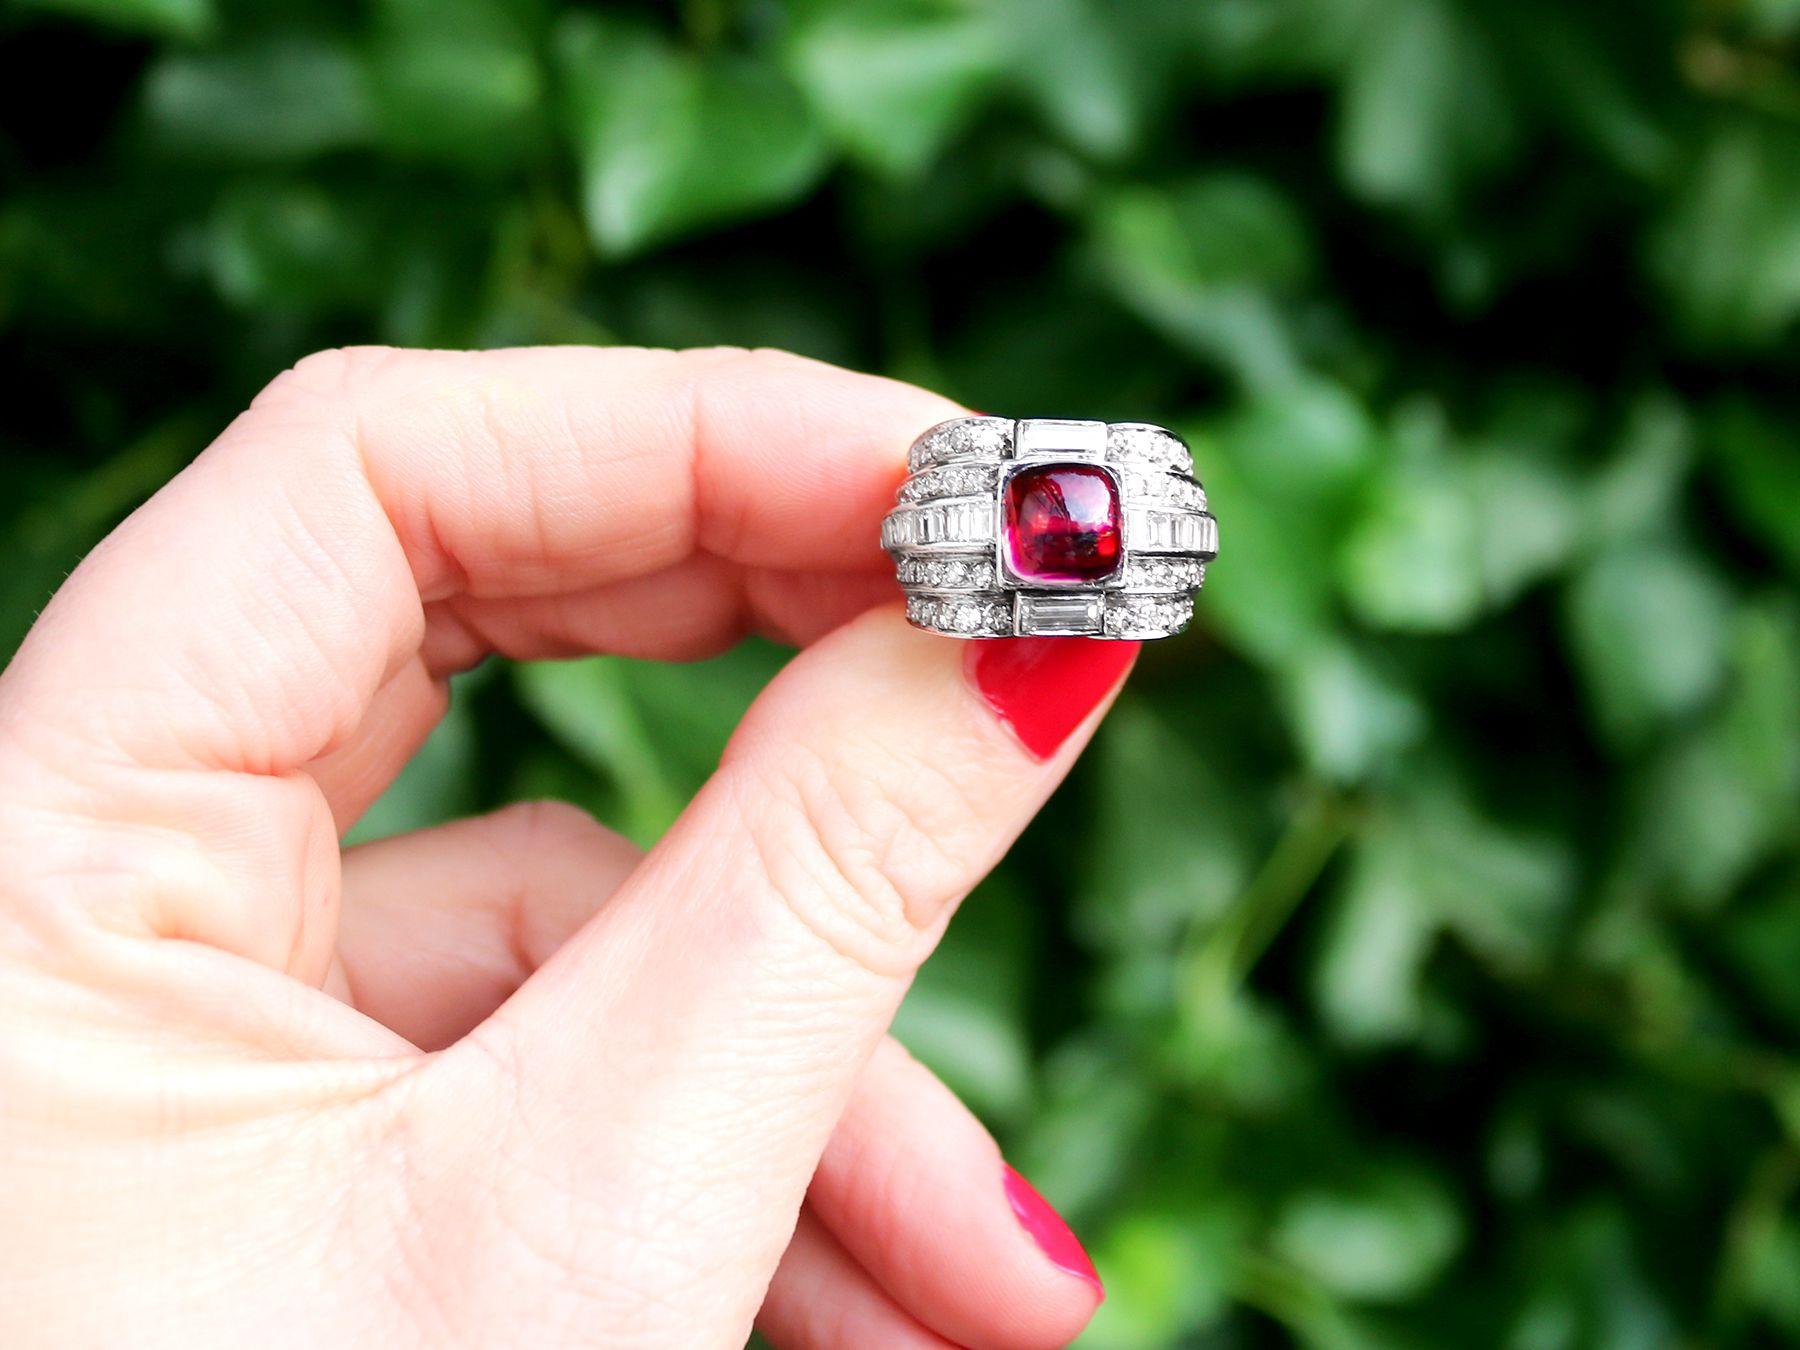 A stunning antique 1930s Art Deco 2.21 carat pink tourmaline and 1.82 carat diamond, platinum cocktail ring; part of our diverse antique jewelry collections.

This stunning, fine and impressive cabochon cut pink tourmaline ring with diamonds has